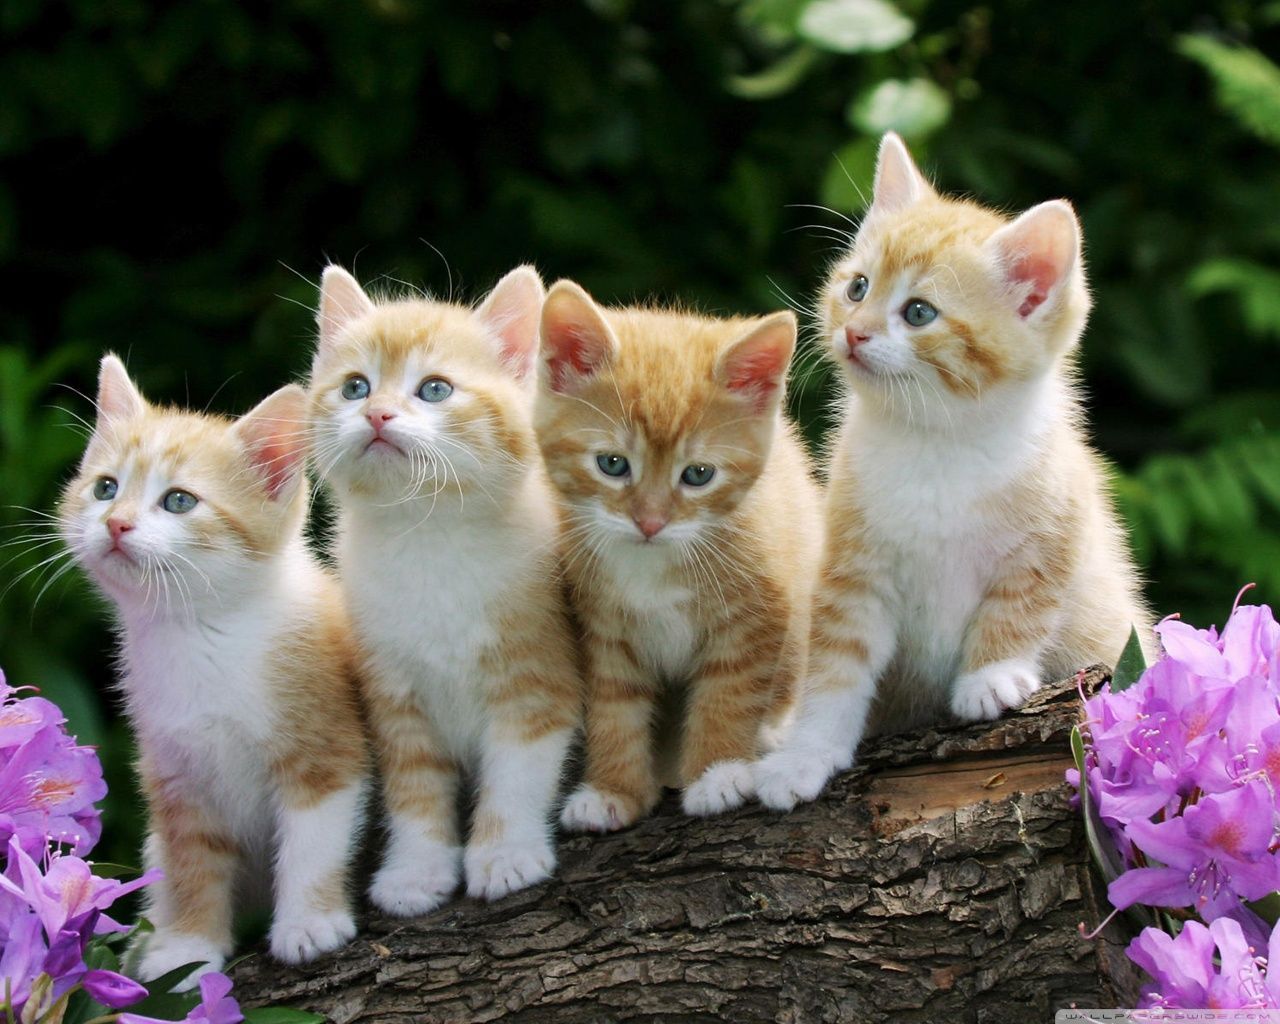 Cats and Kittens Wallpaper Free Cats and Kittens Background